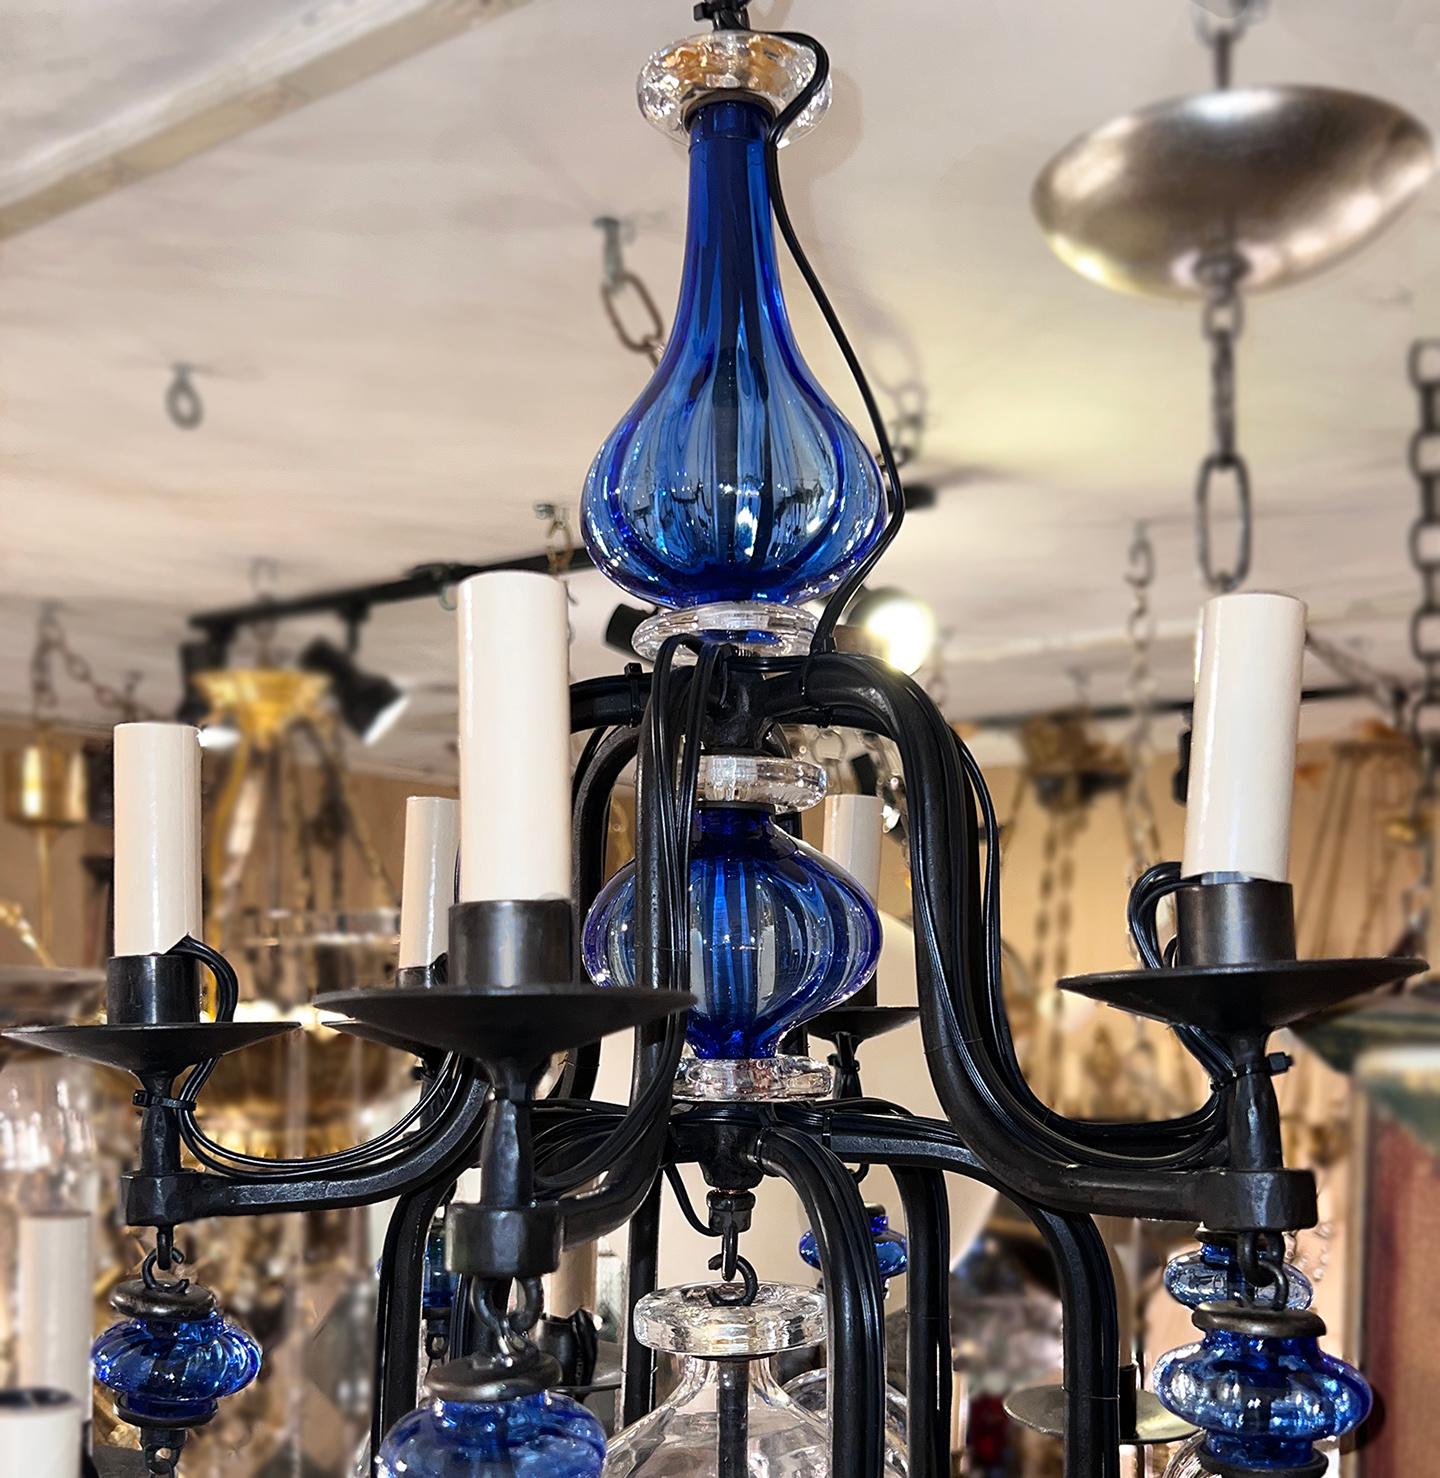 A circa 1970's Swedish iron chandelier with blown blue glass insets.

Measurements:
Current drop: 27